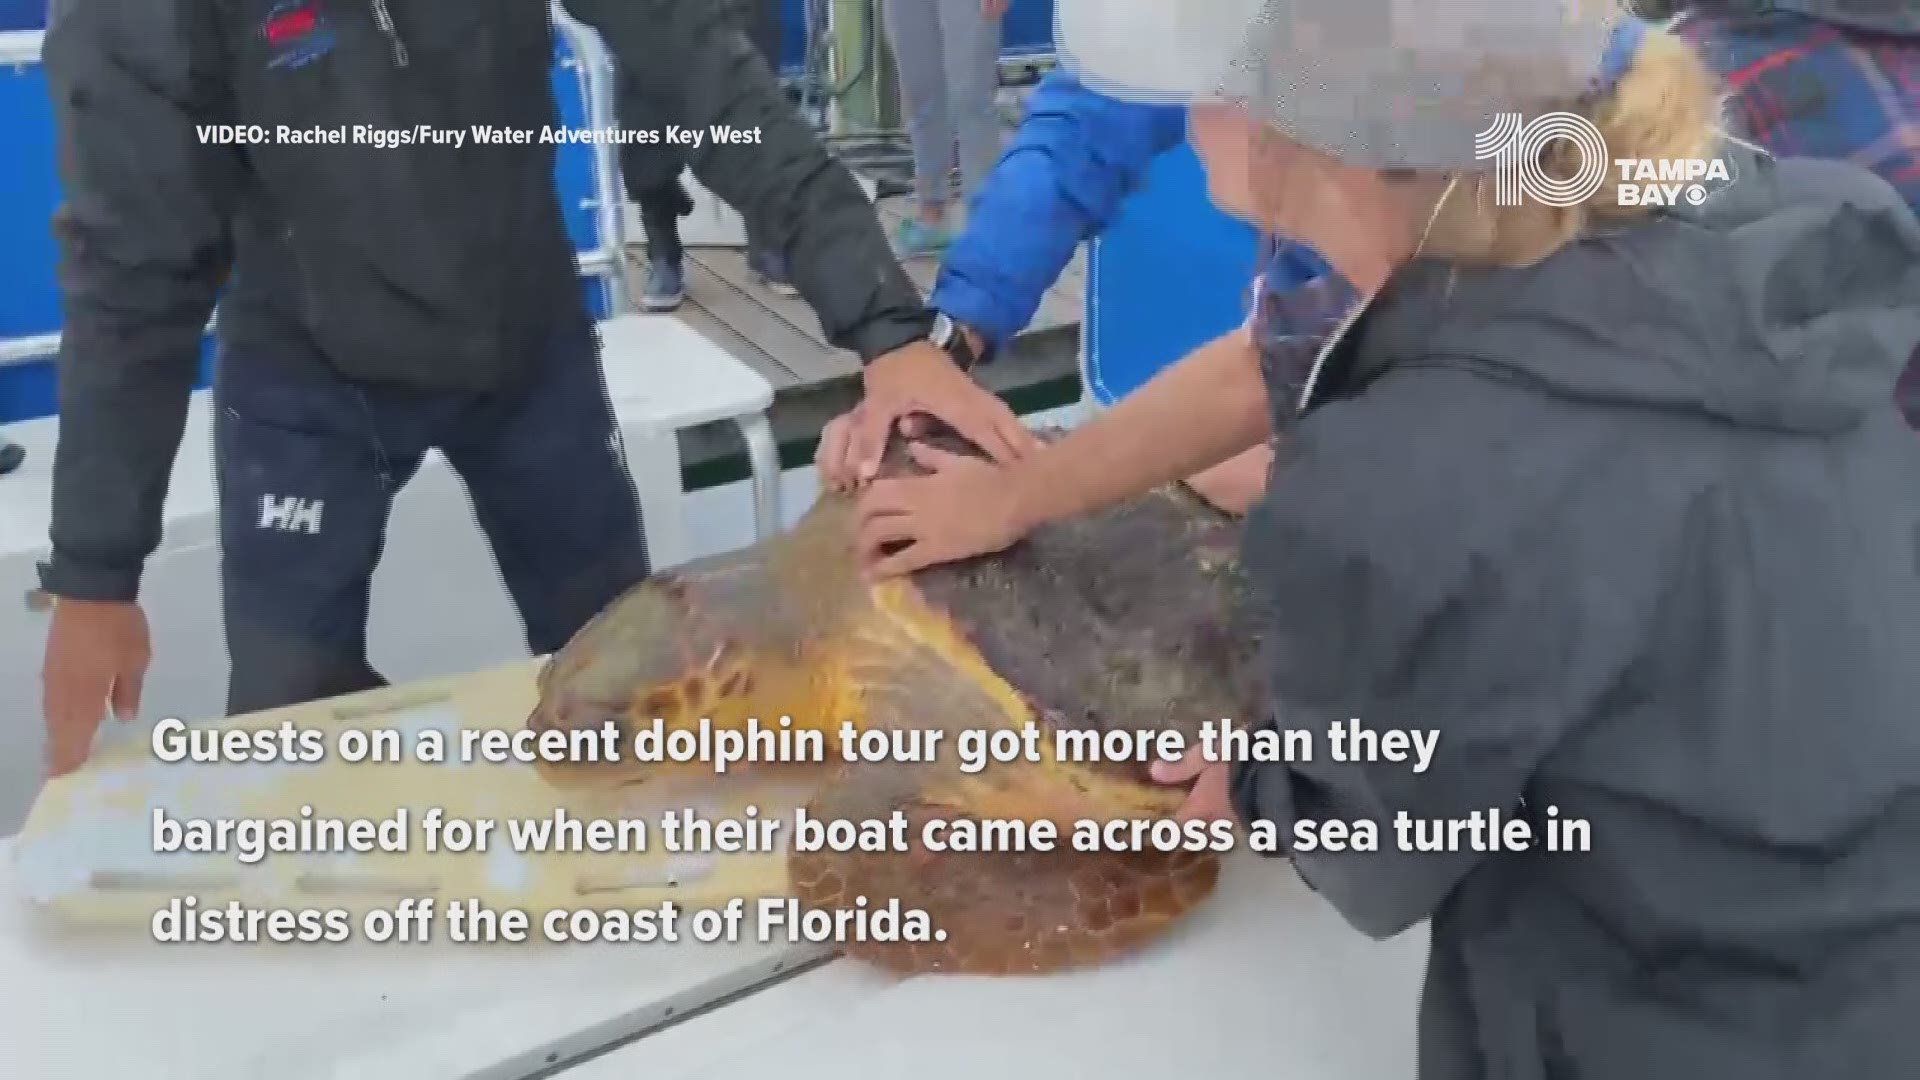 An injured sea turtle is now getting the care she needs after a rescue off the coast of the Florida Keys on Tuesday.